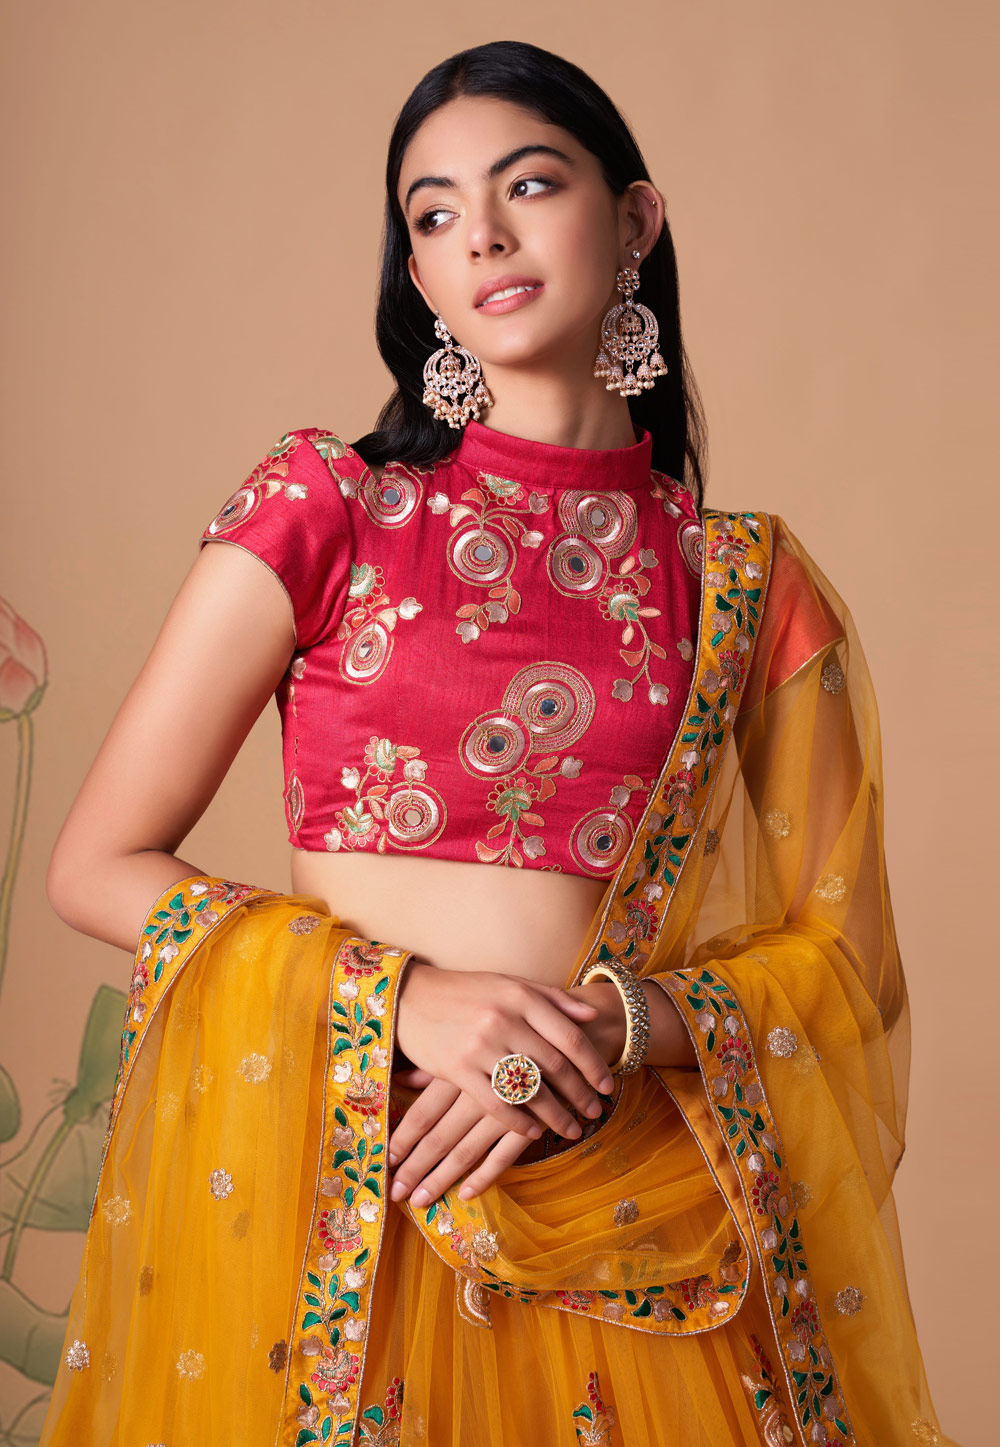 From runways to celebrity wardrobes, yellow lehengas are having a major  moment this season | Vogue India